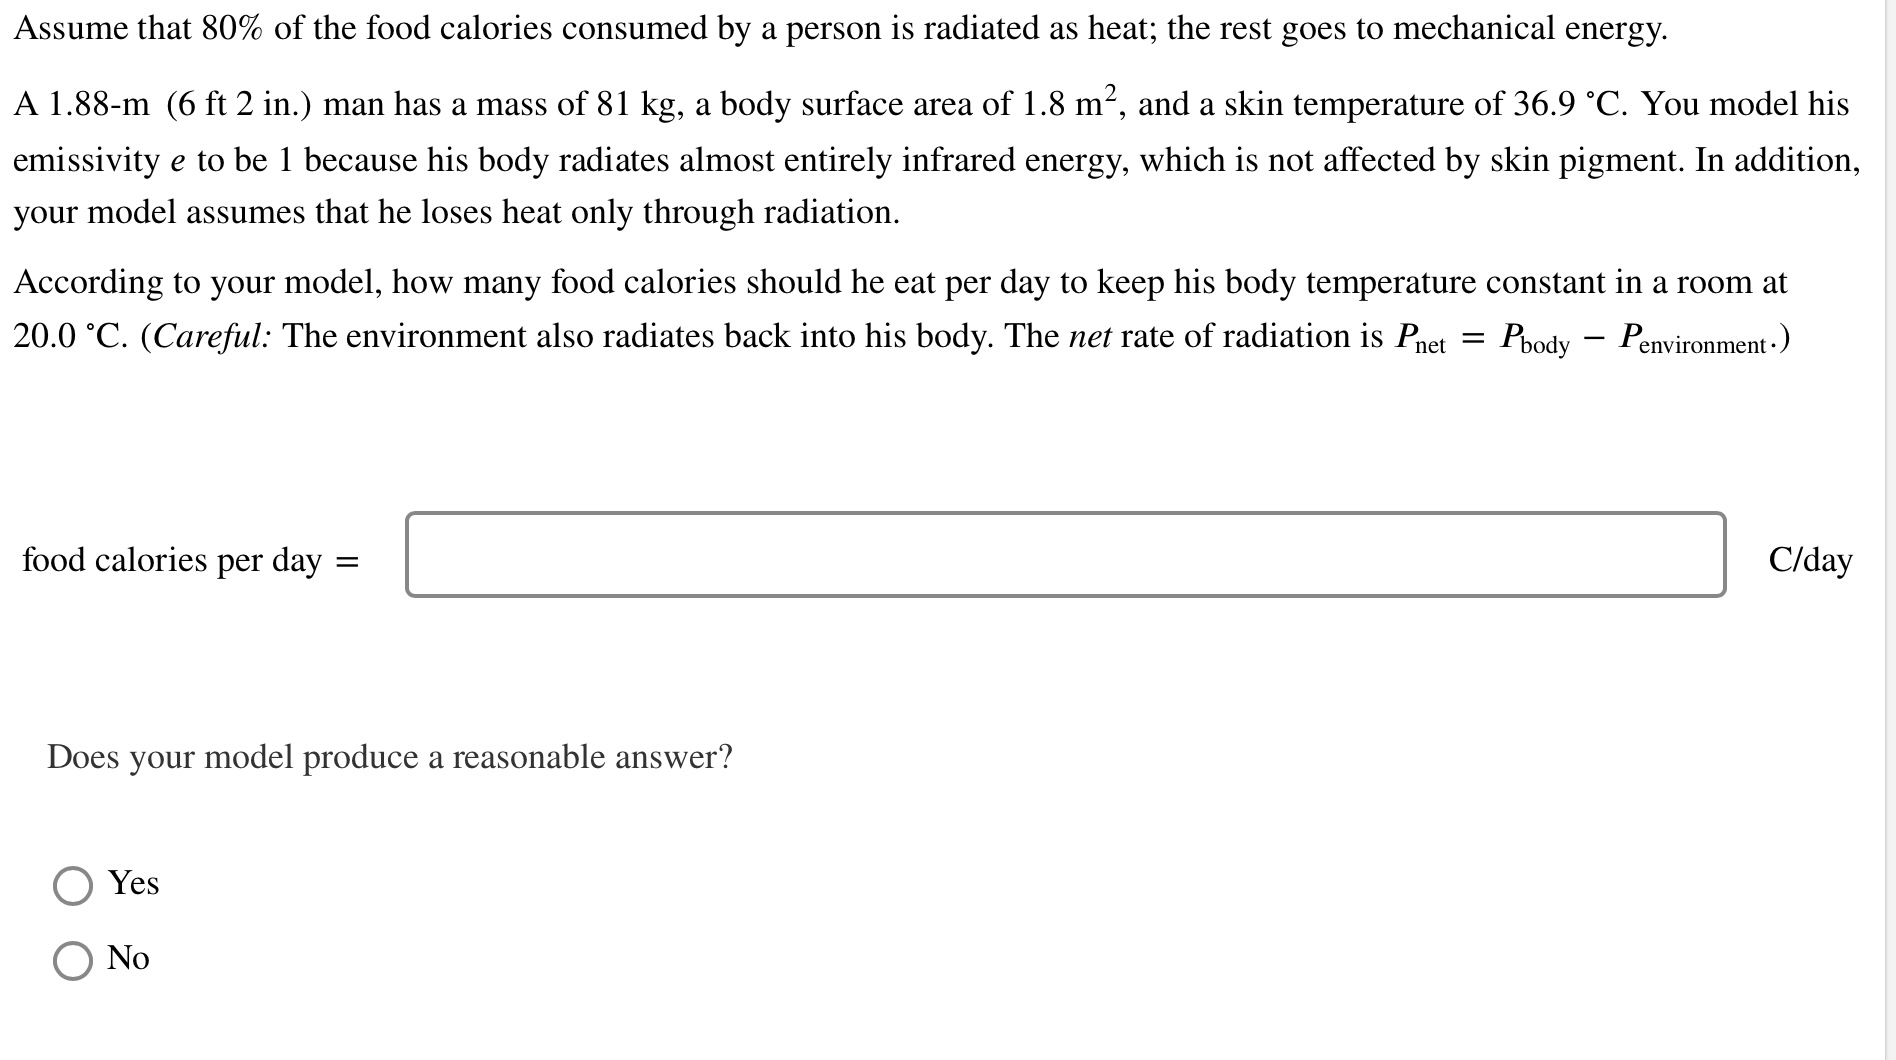 Assume that 80% of the food calories consumed by a person is radiated as heat; the rest goes to mechanical